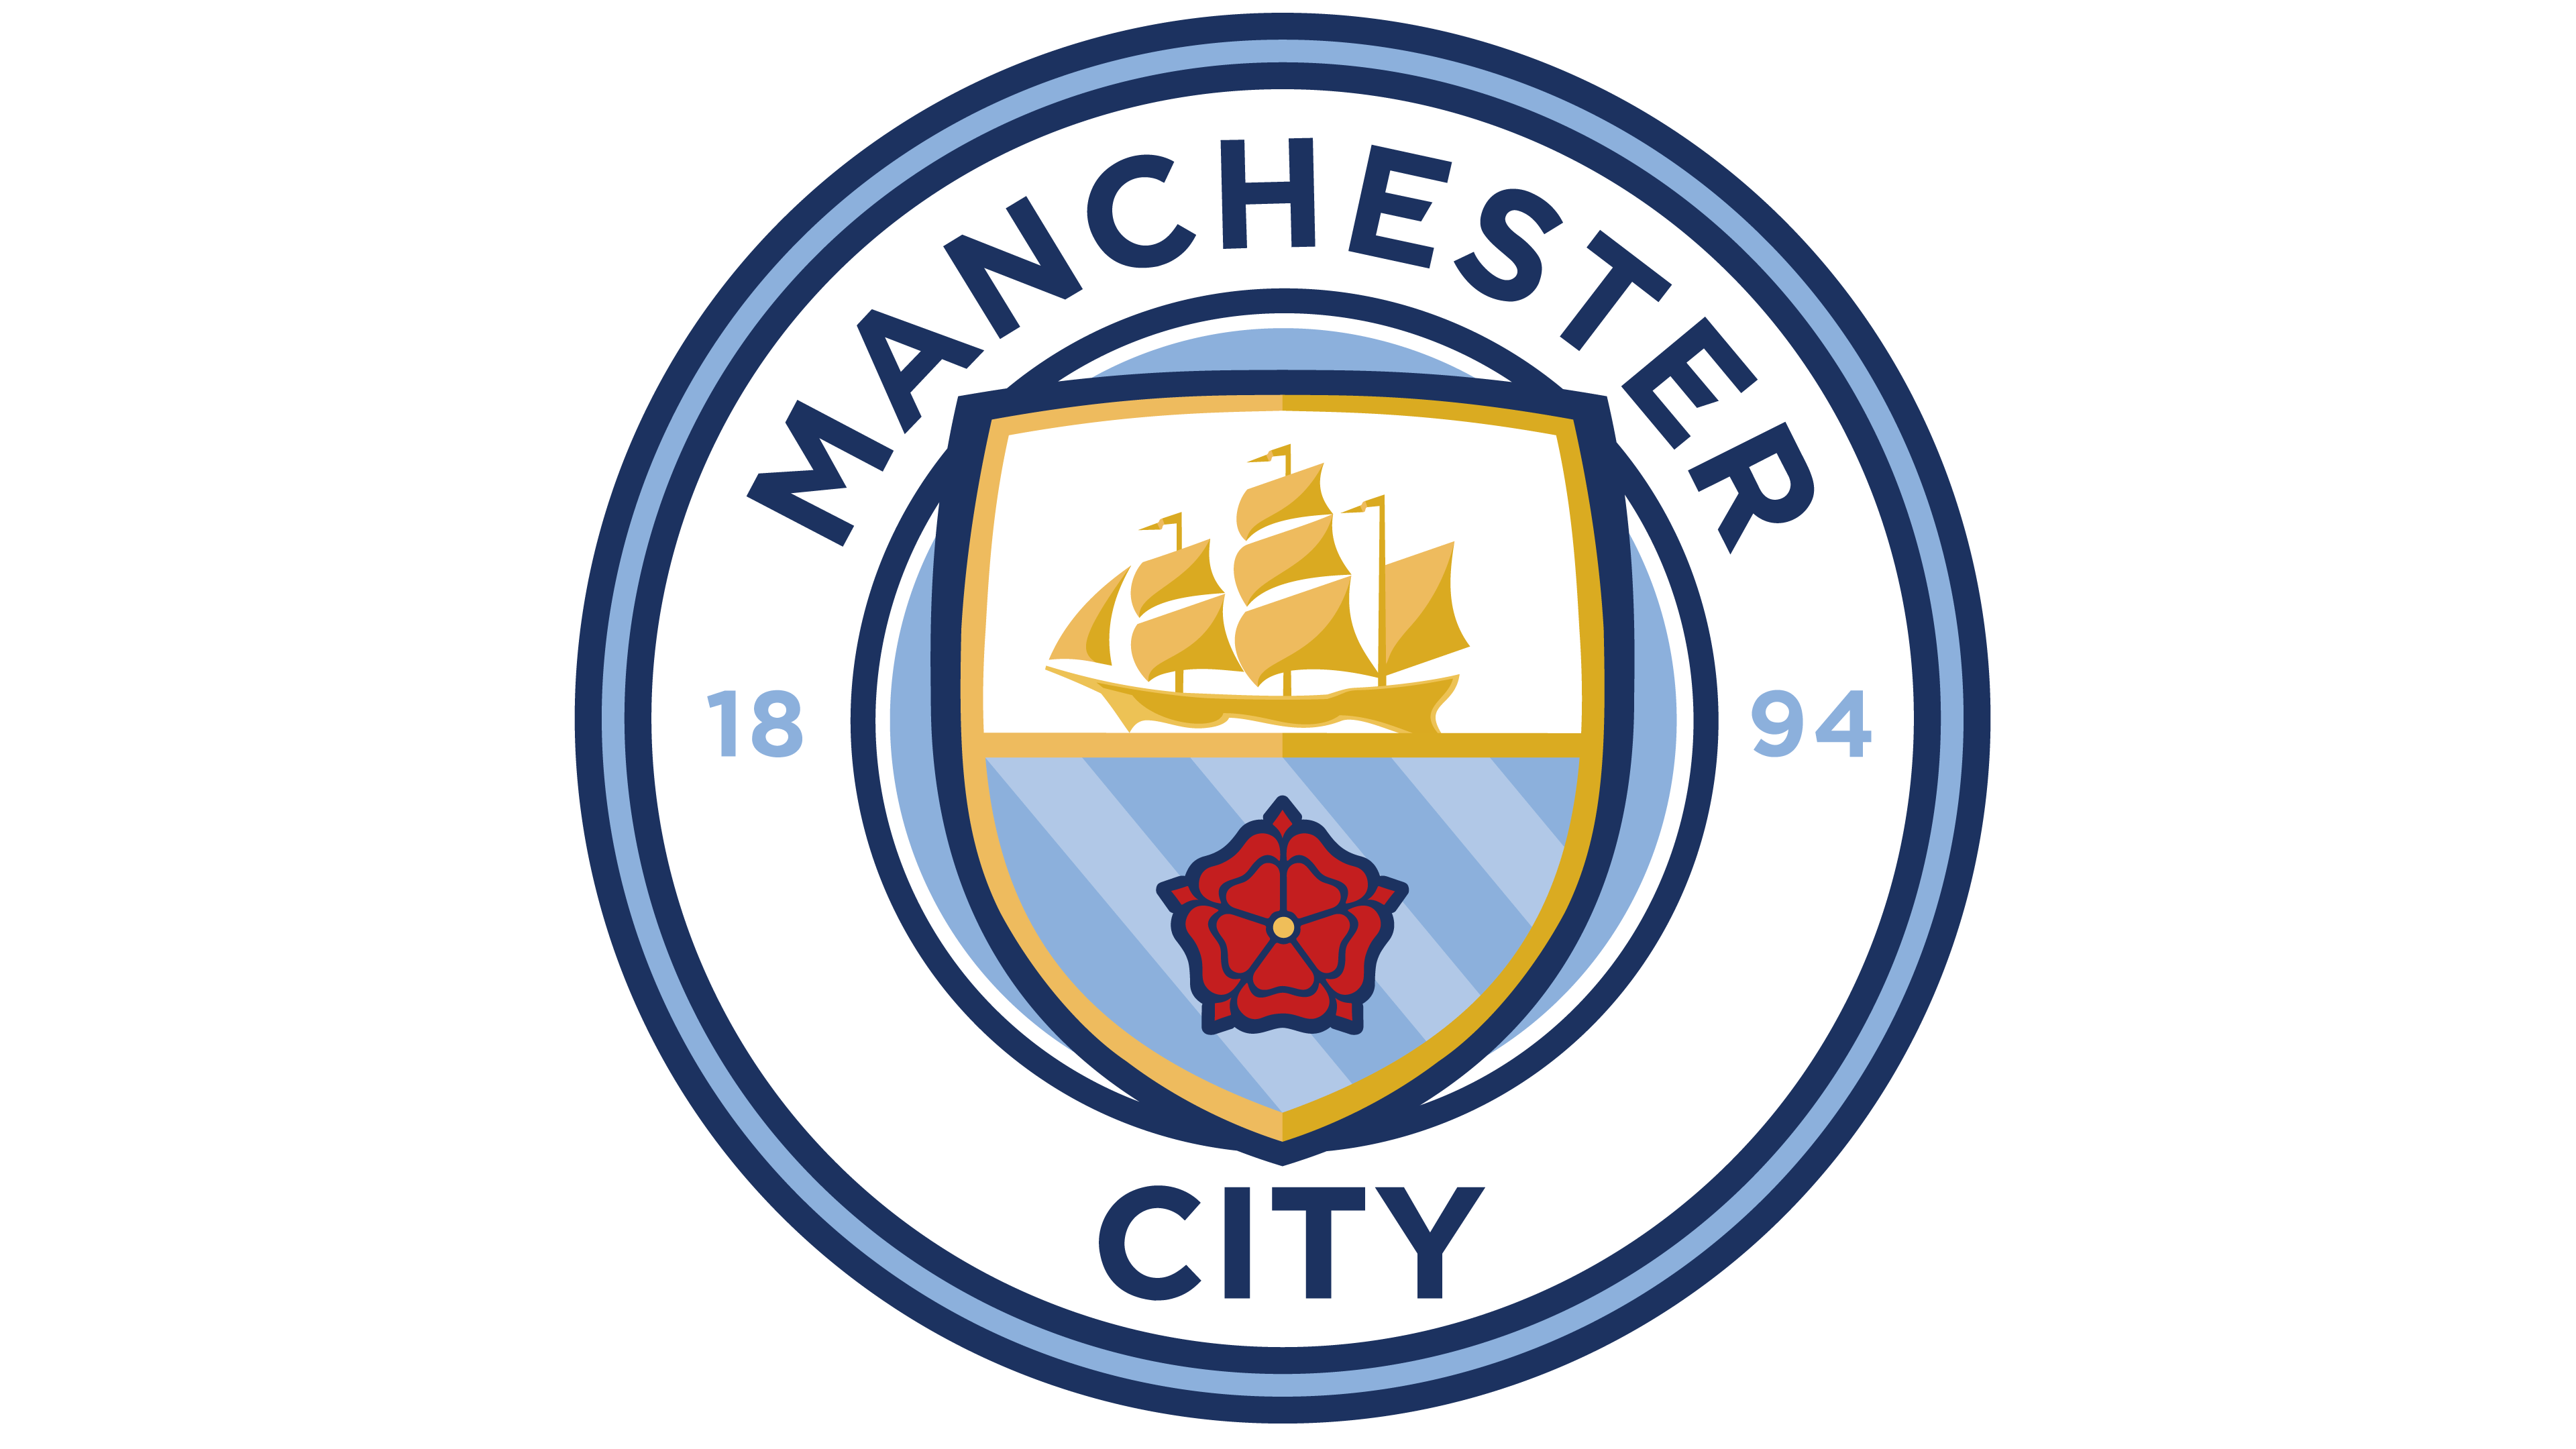 City Logo - Manchester City logo - Interesting History of the Team Name and emblem